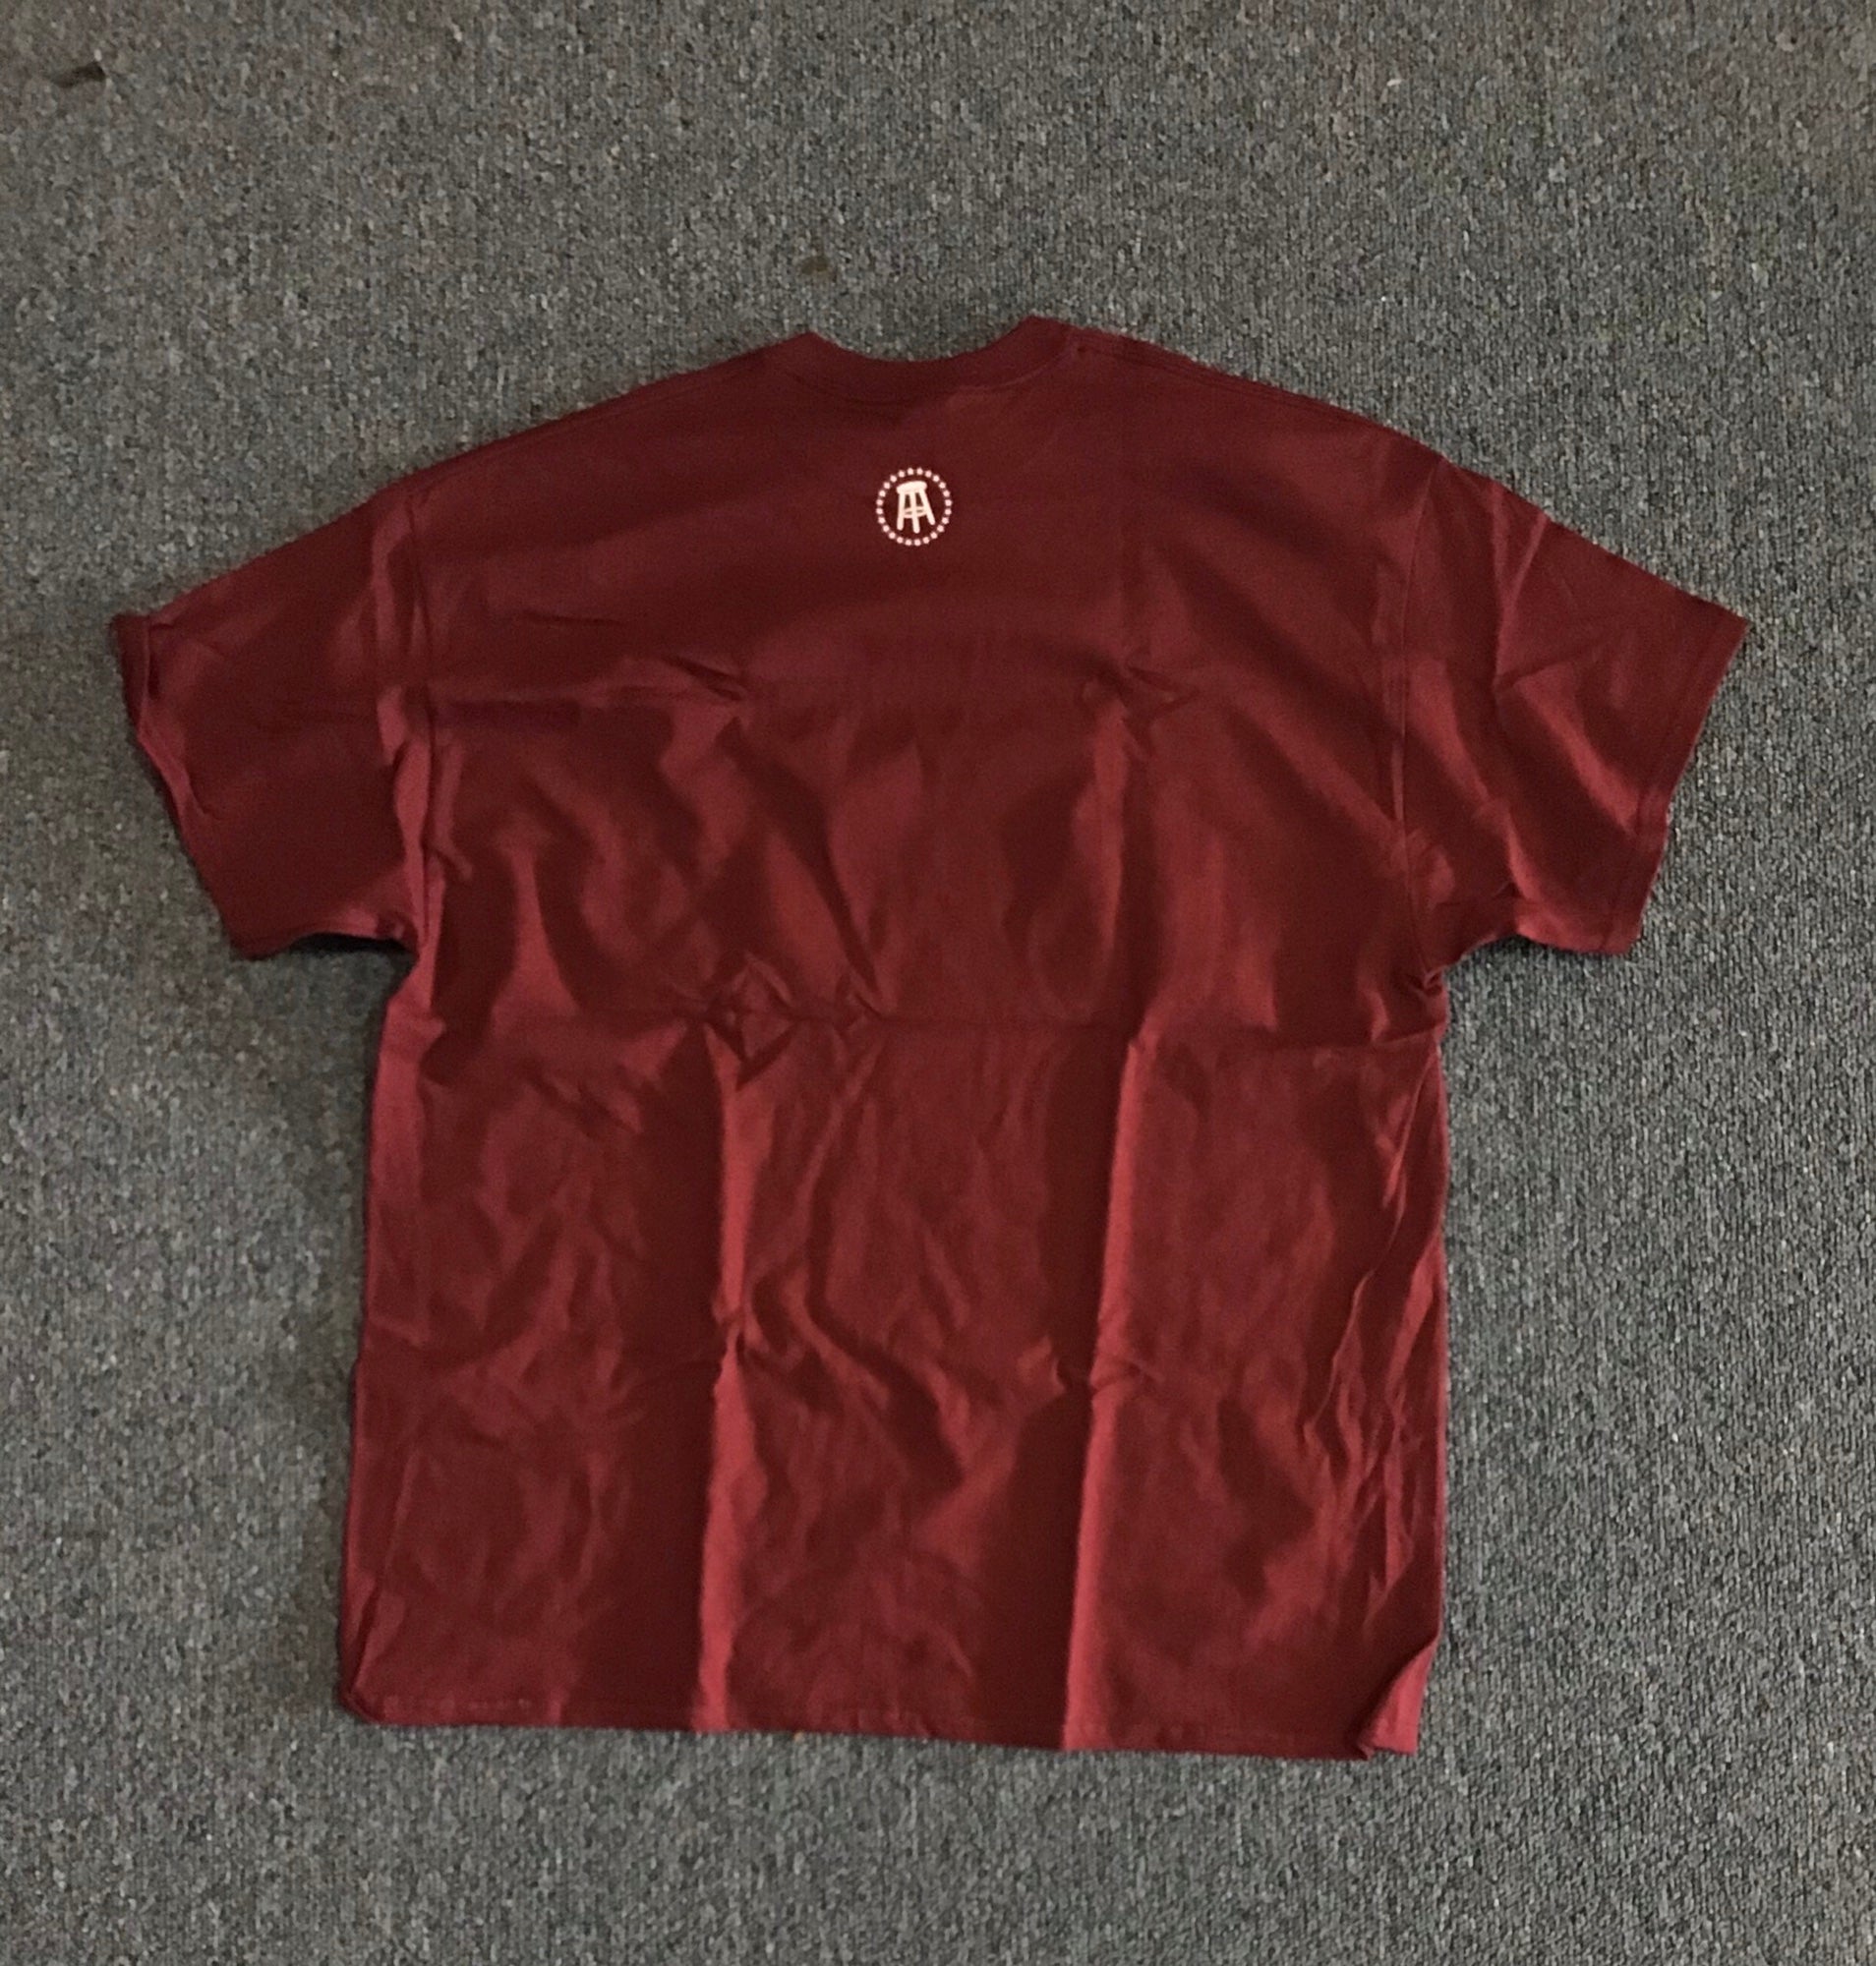 Barstool Sports launch Blink/Avalanche Stanley Cup tee : r/Blink182